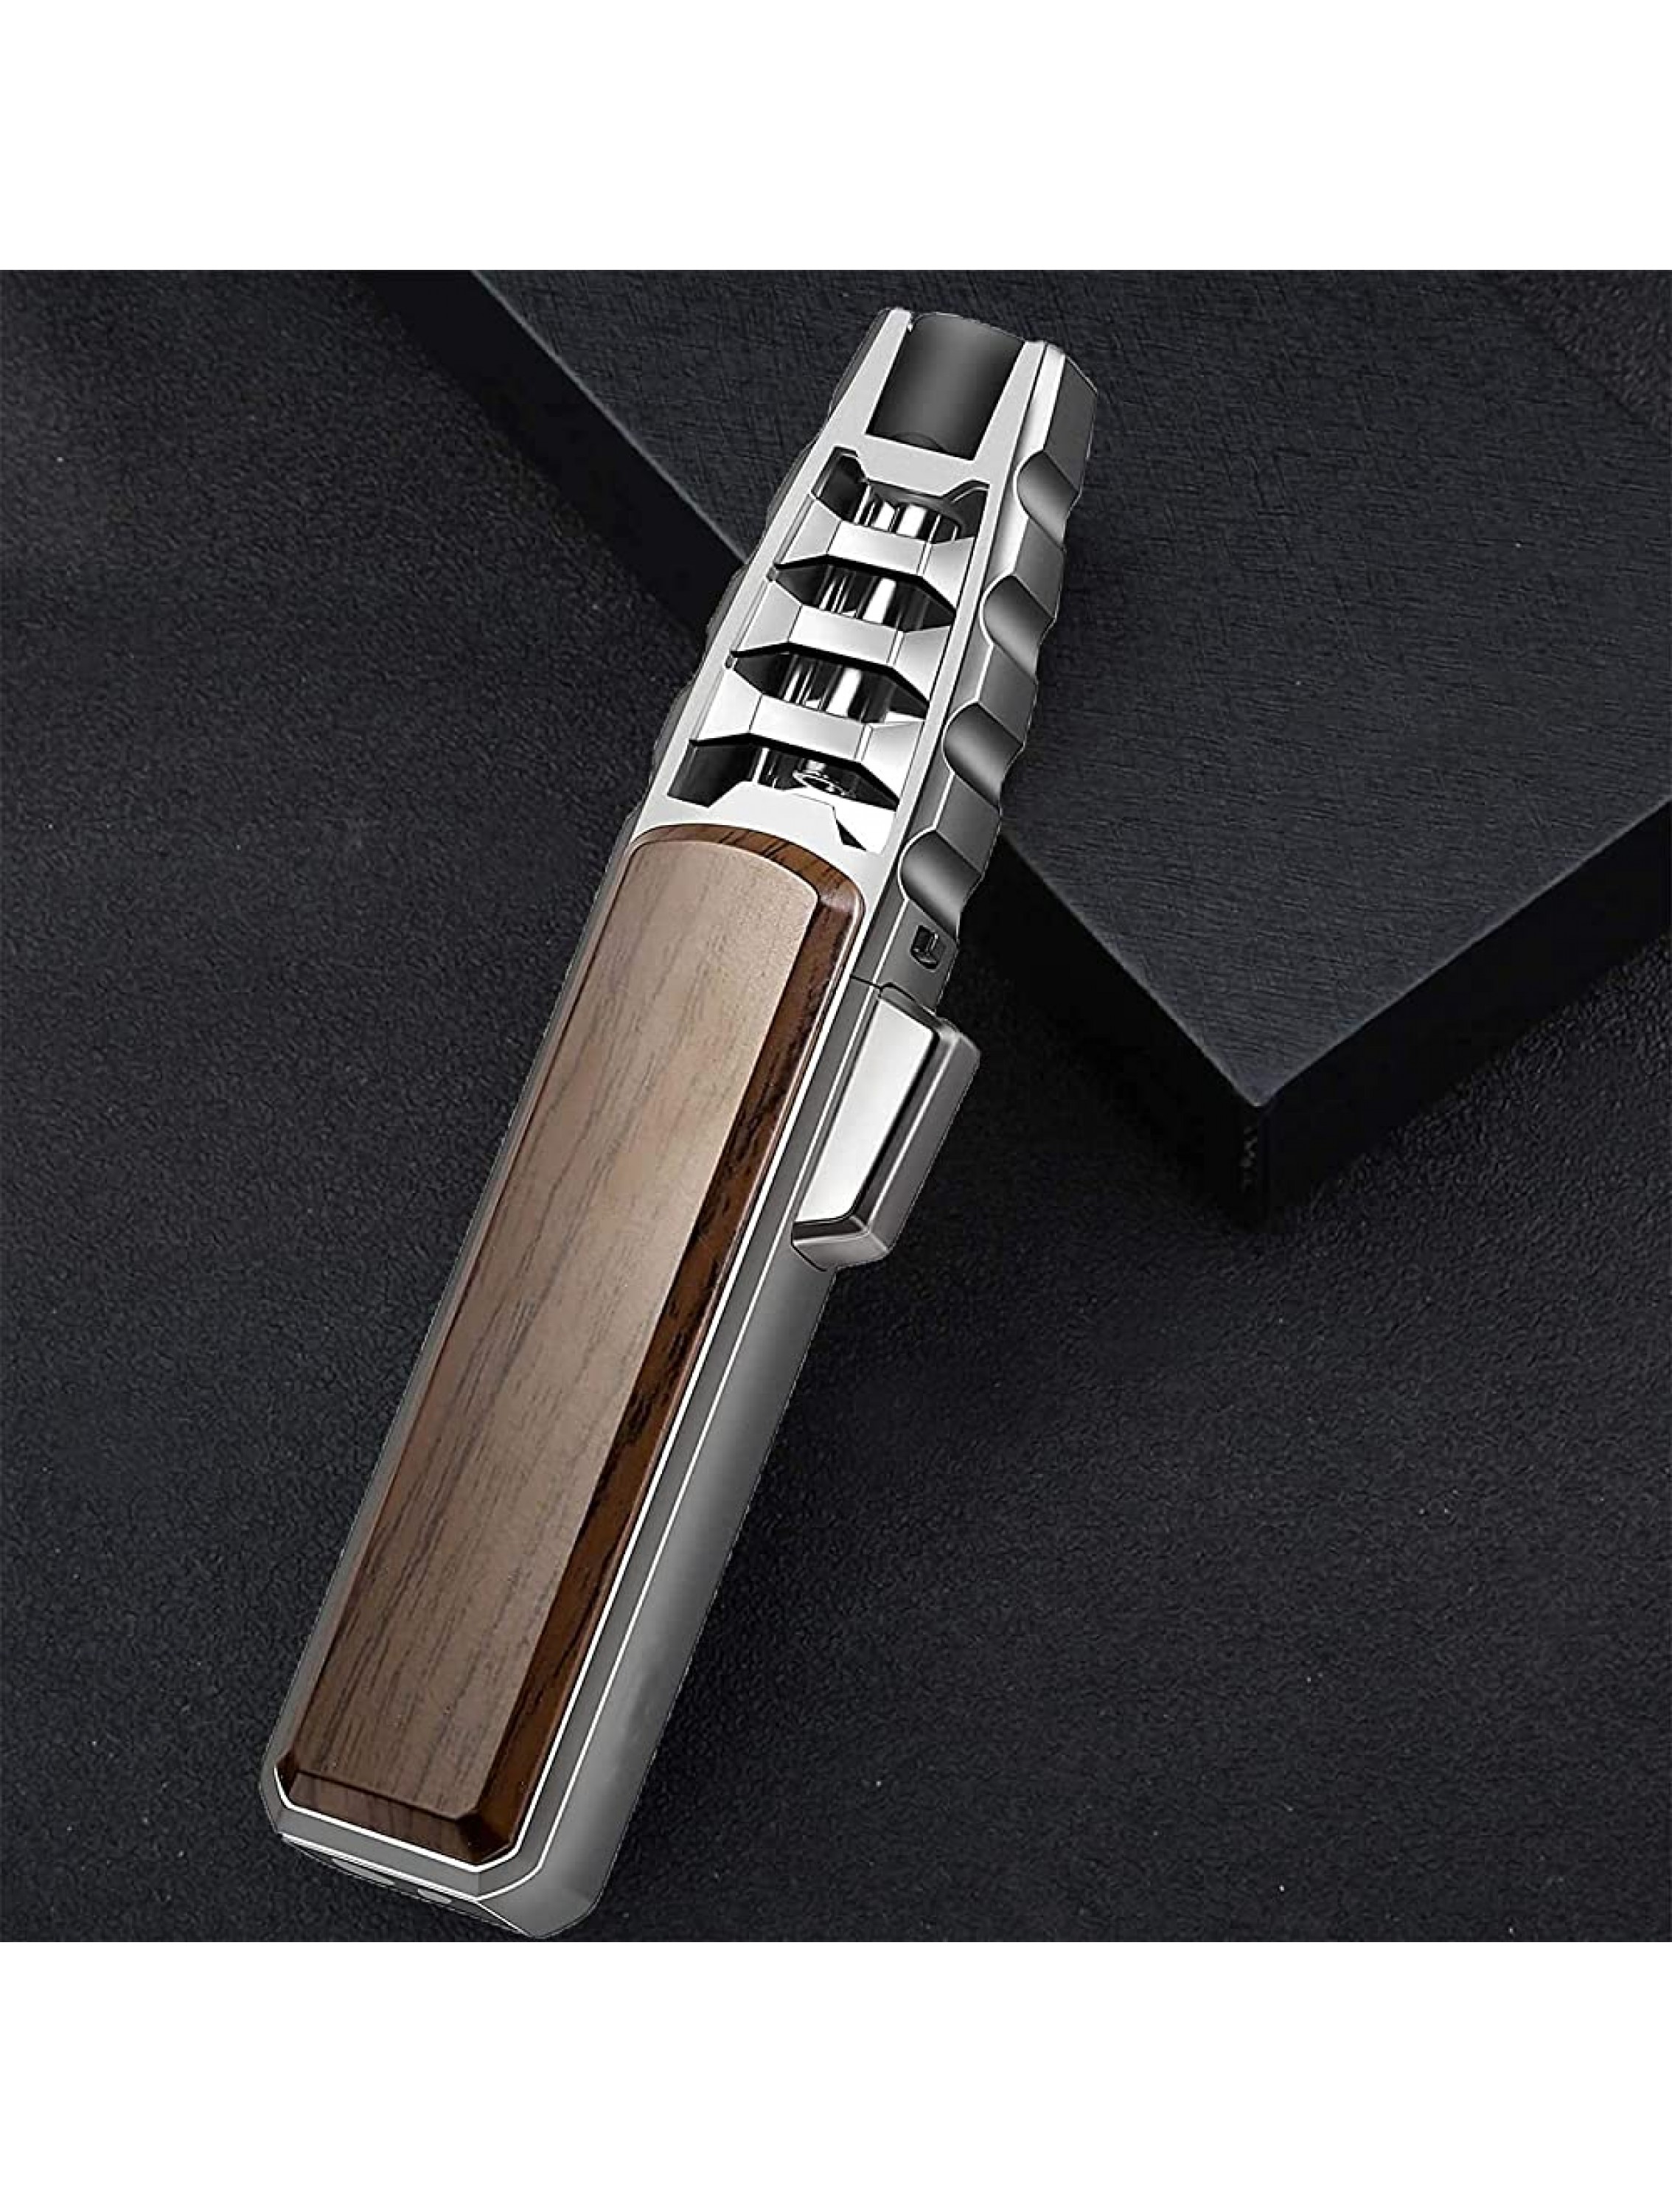 Torch Lighters Refillable Kitchen Butane Torch With Safety Lock & Adjustable Flame for Cooking Food Camping BBQ Butane Gas Not Included Walnut Silver - B4NWQJ3GM